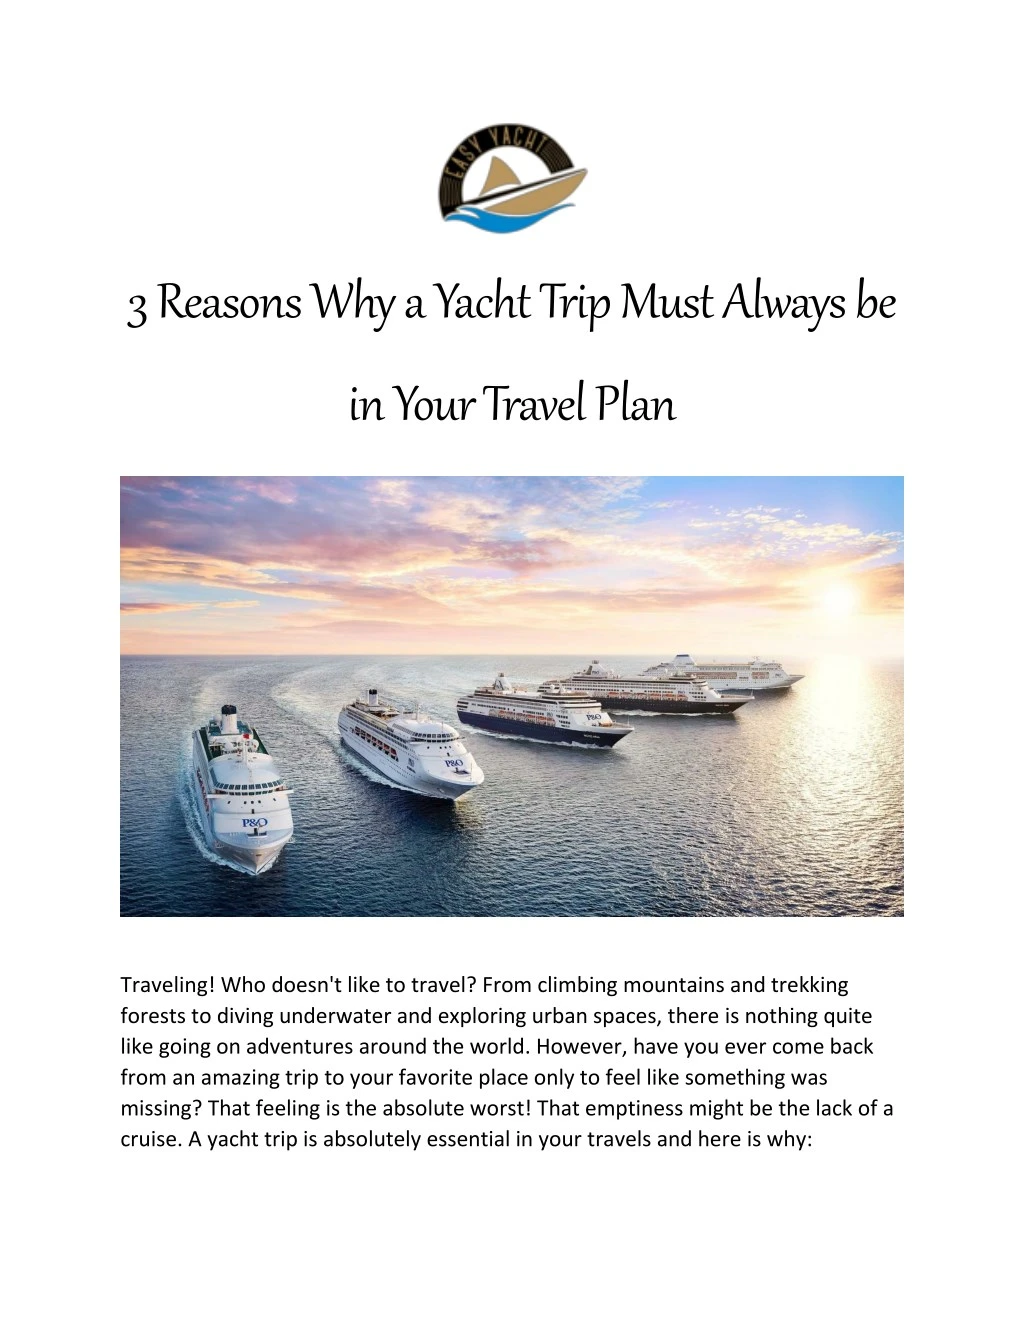 3 reasons why a yacht trip must always be